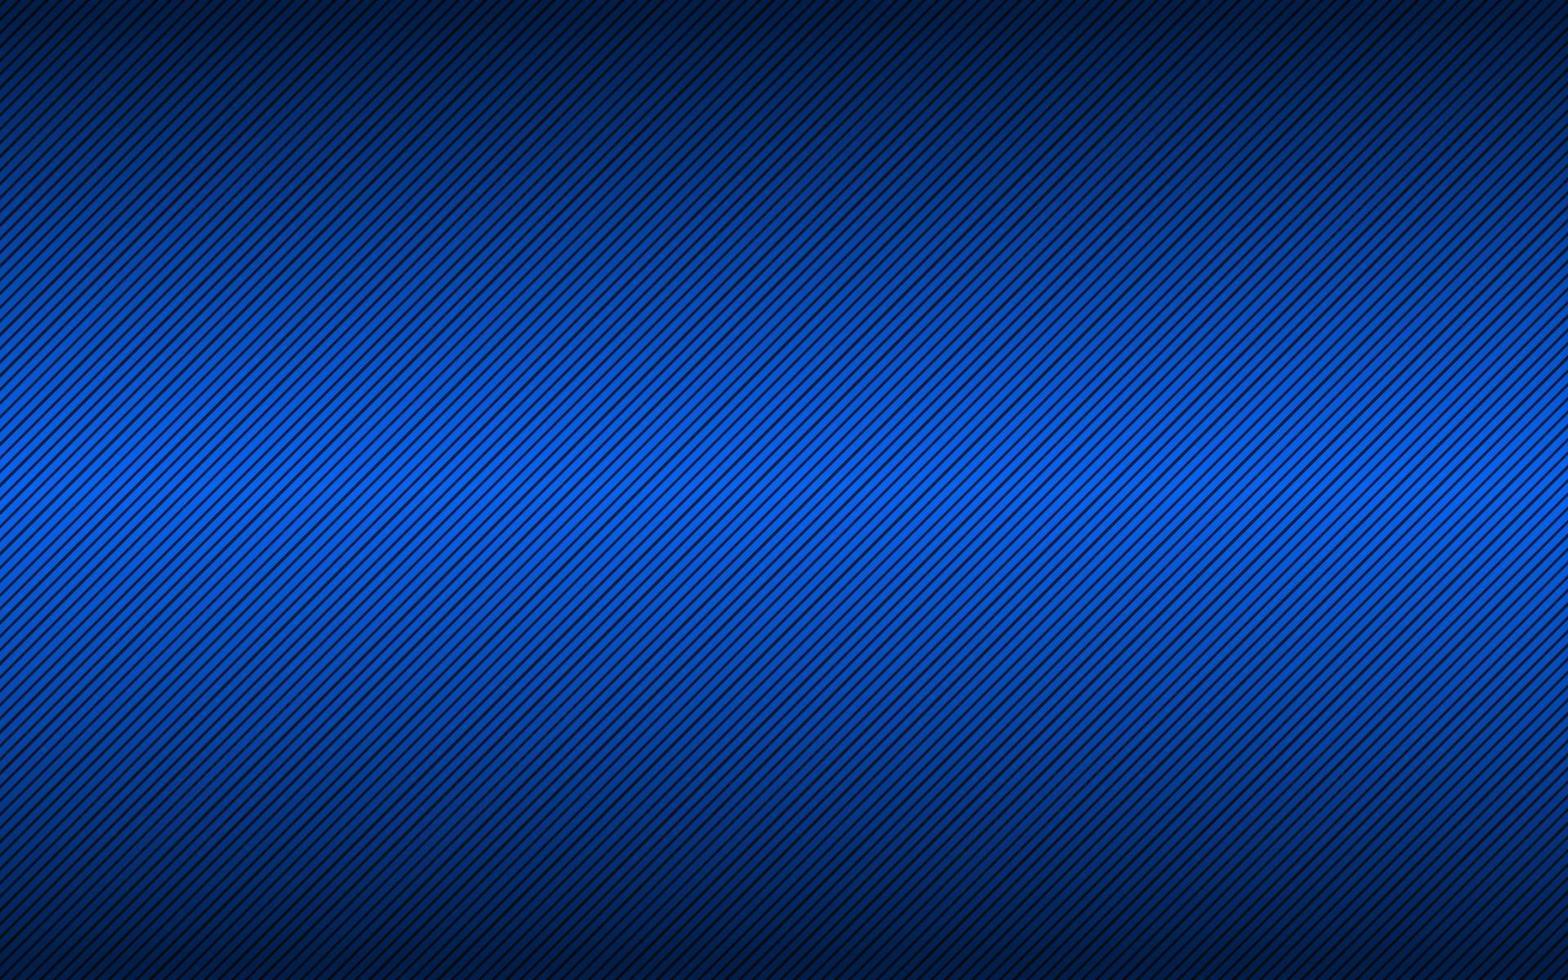 Abstact bright black and blue background with diagonal lines. Simple vector illustration